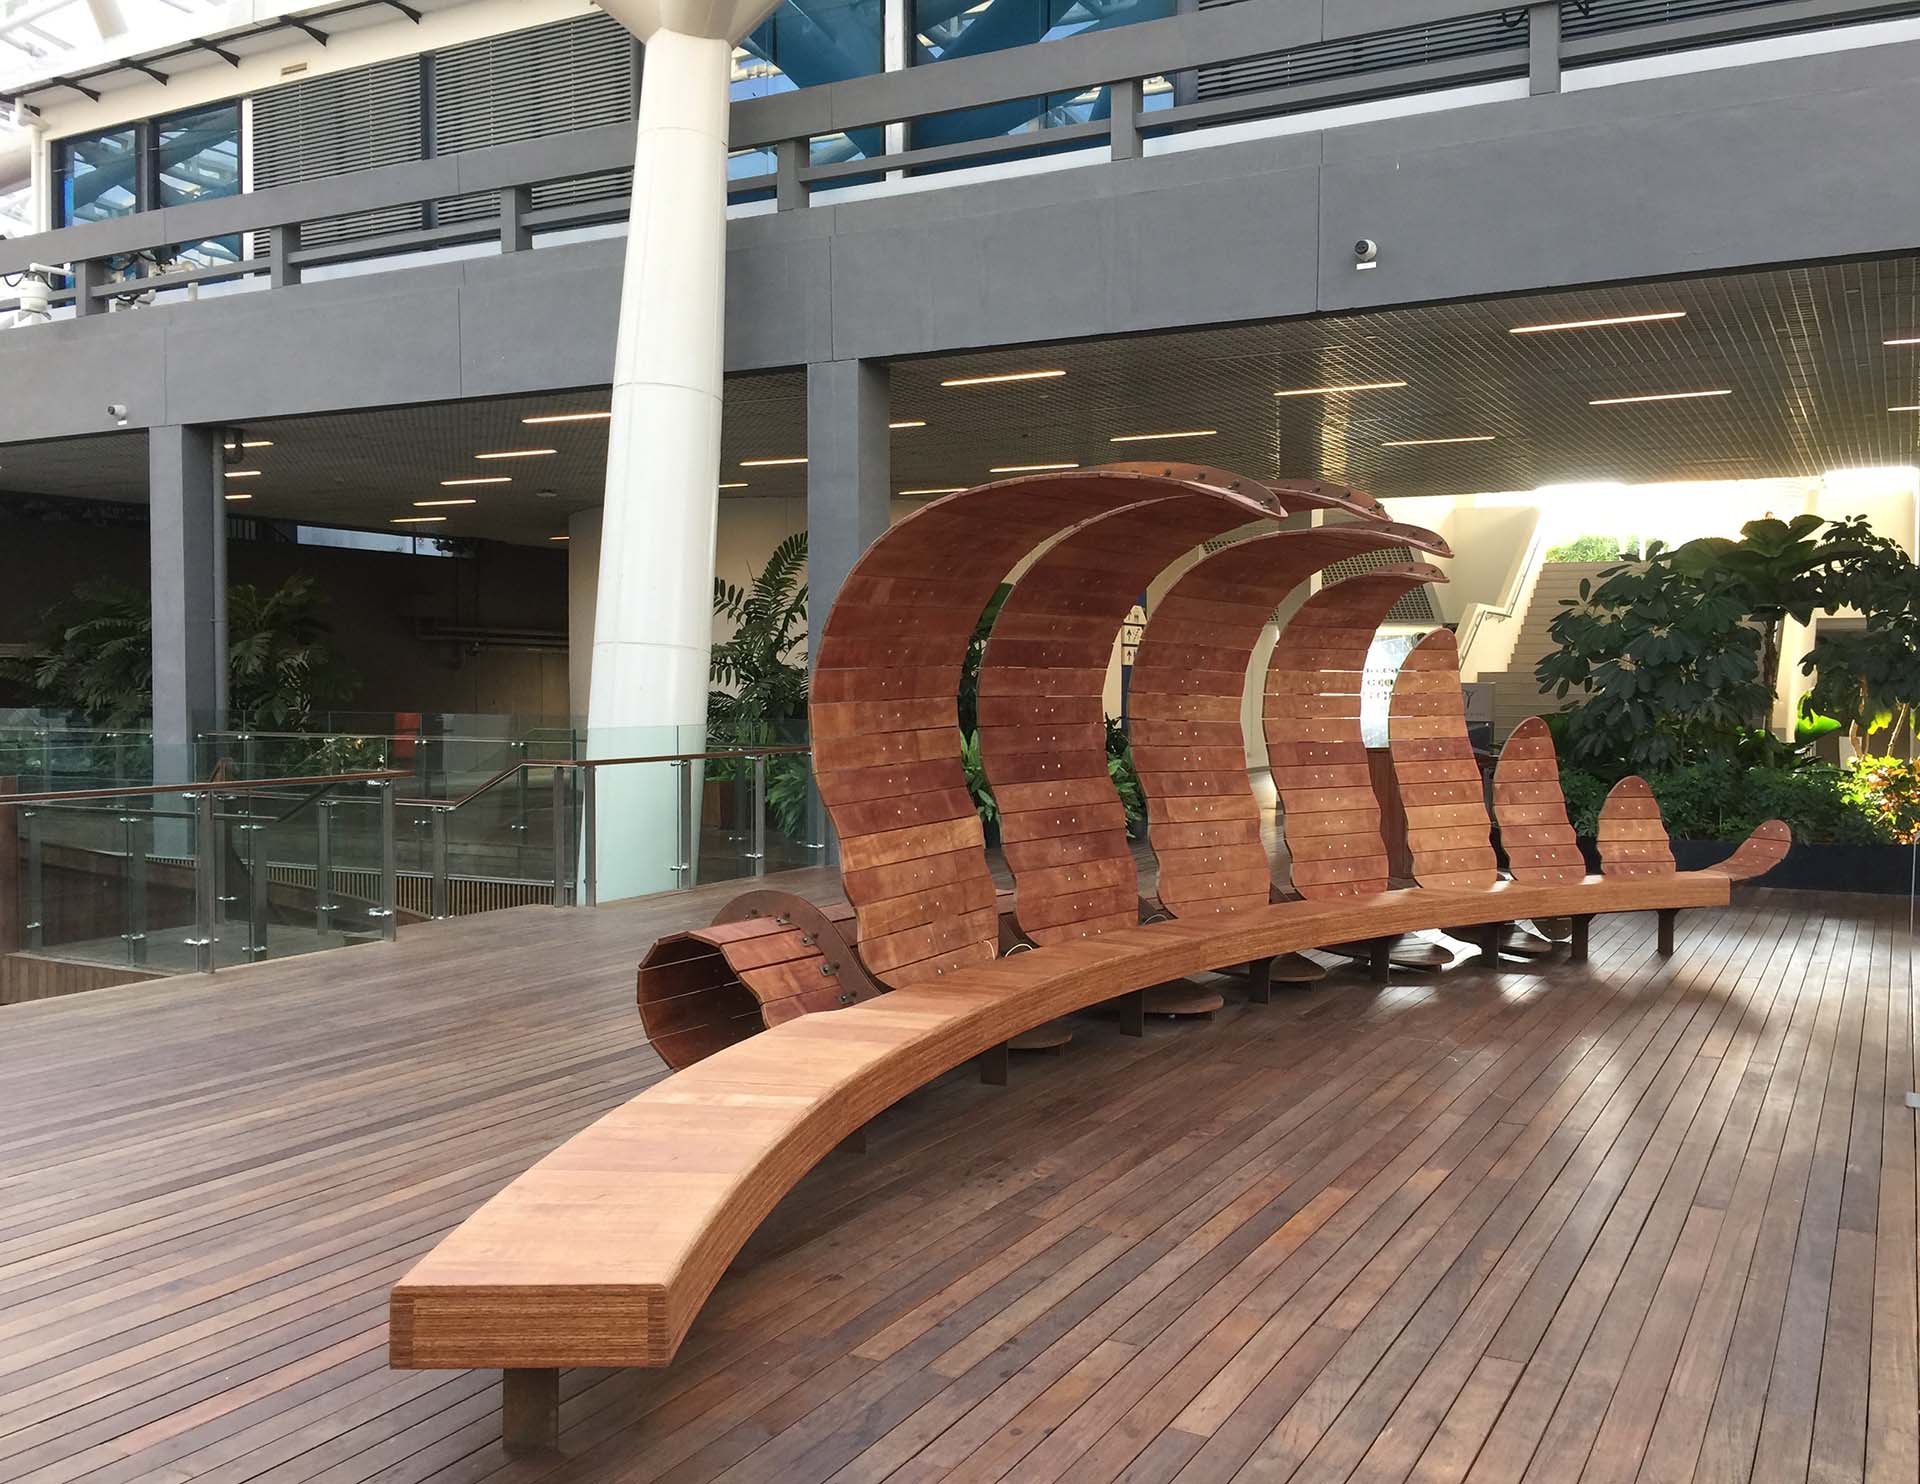 Fern, an art installation that doubles as a wooden bench shaped like the frond of a fern